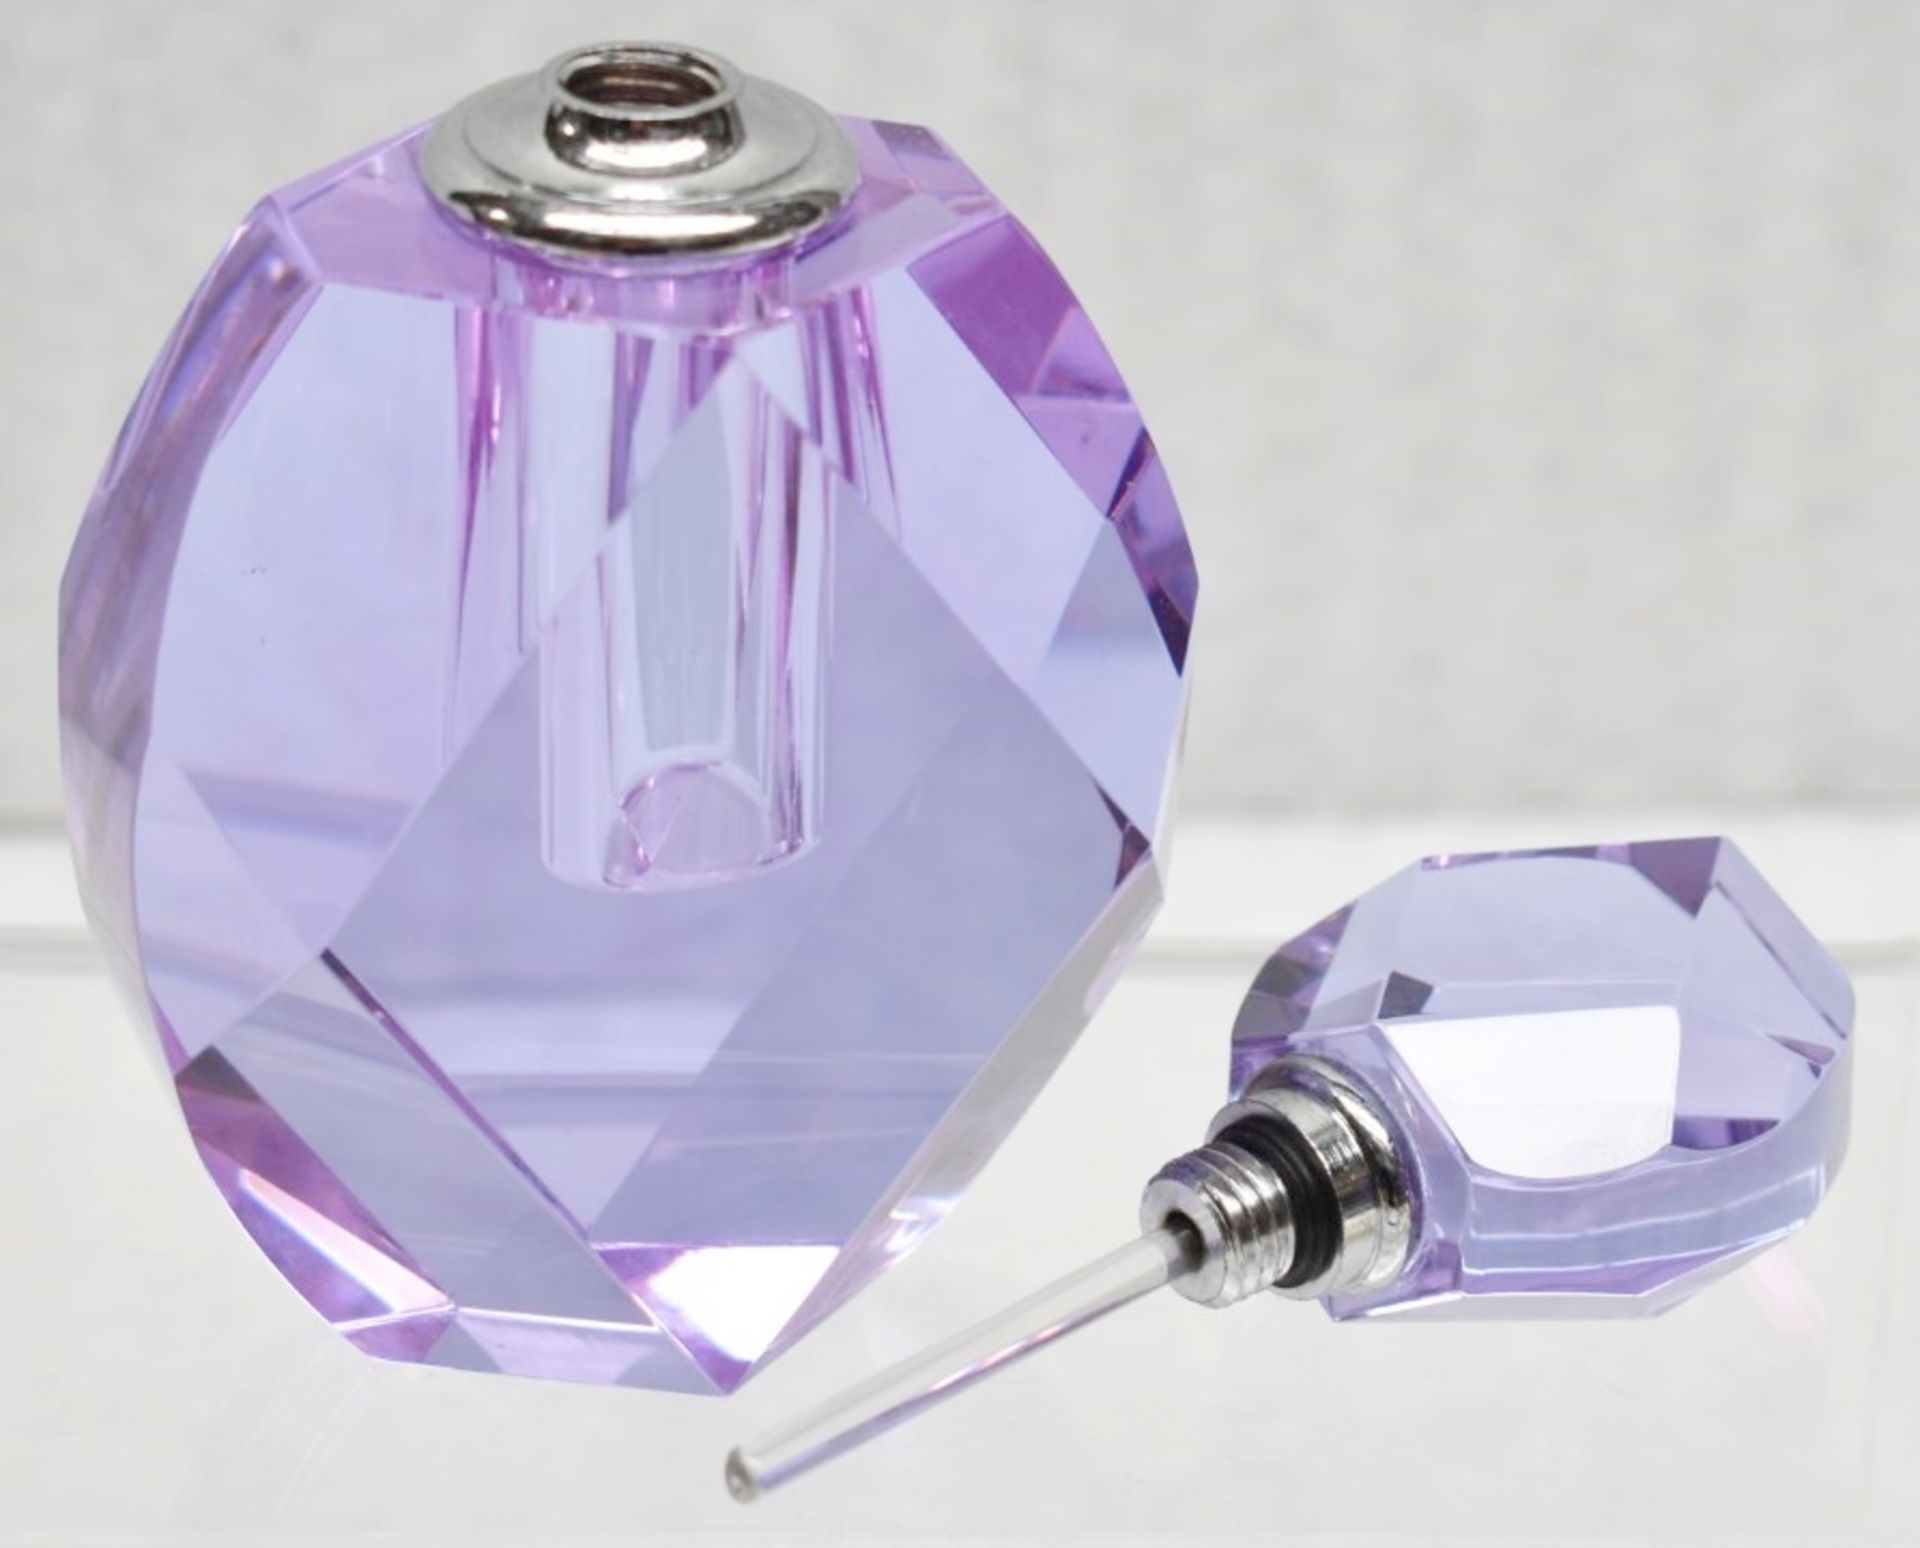 2 x Vintage-Style Cut Glass Perfume Bottles In Purple / Pink - Image 4 of 5